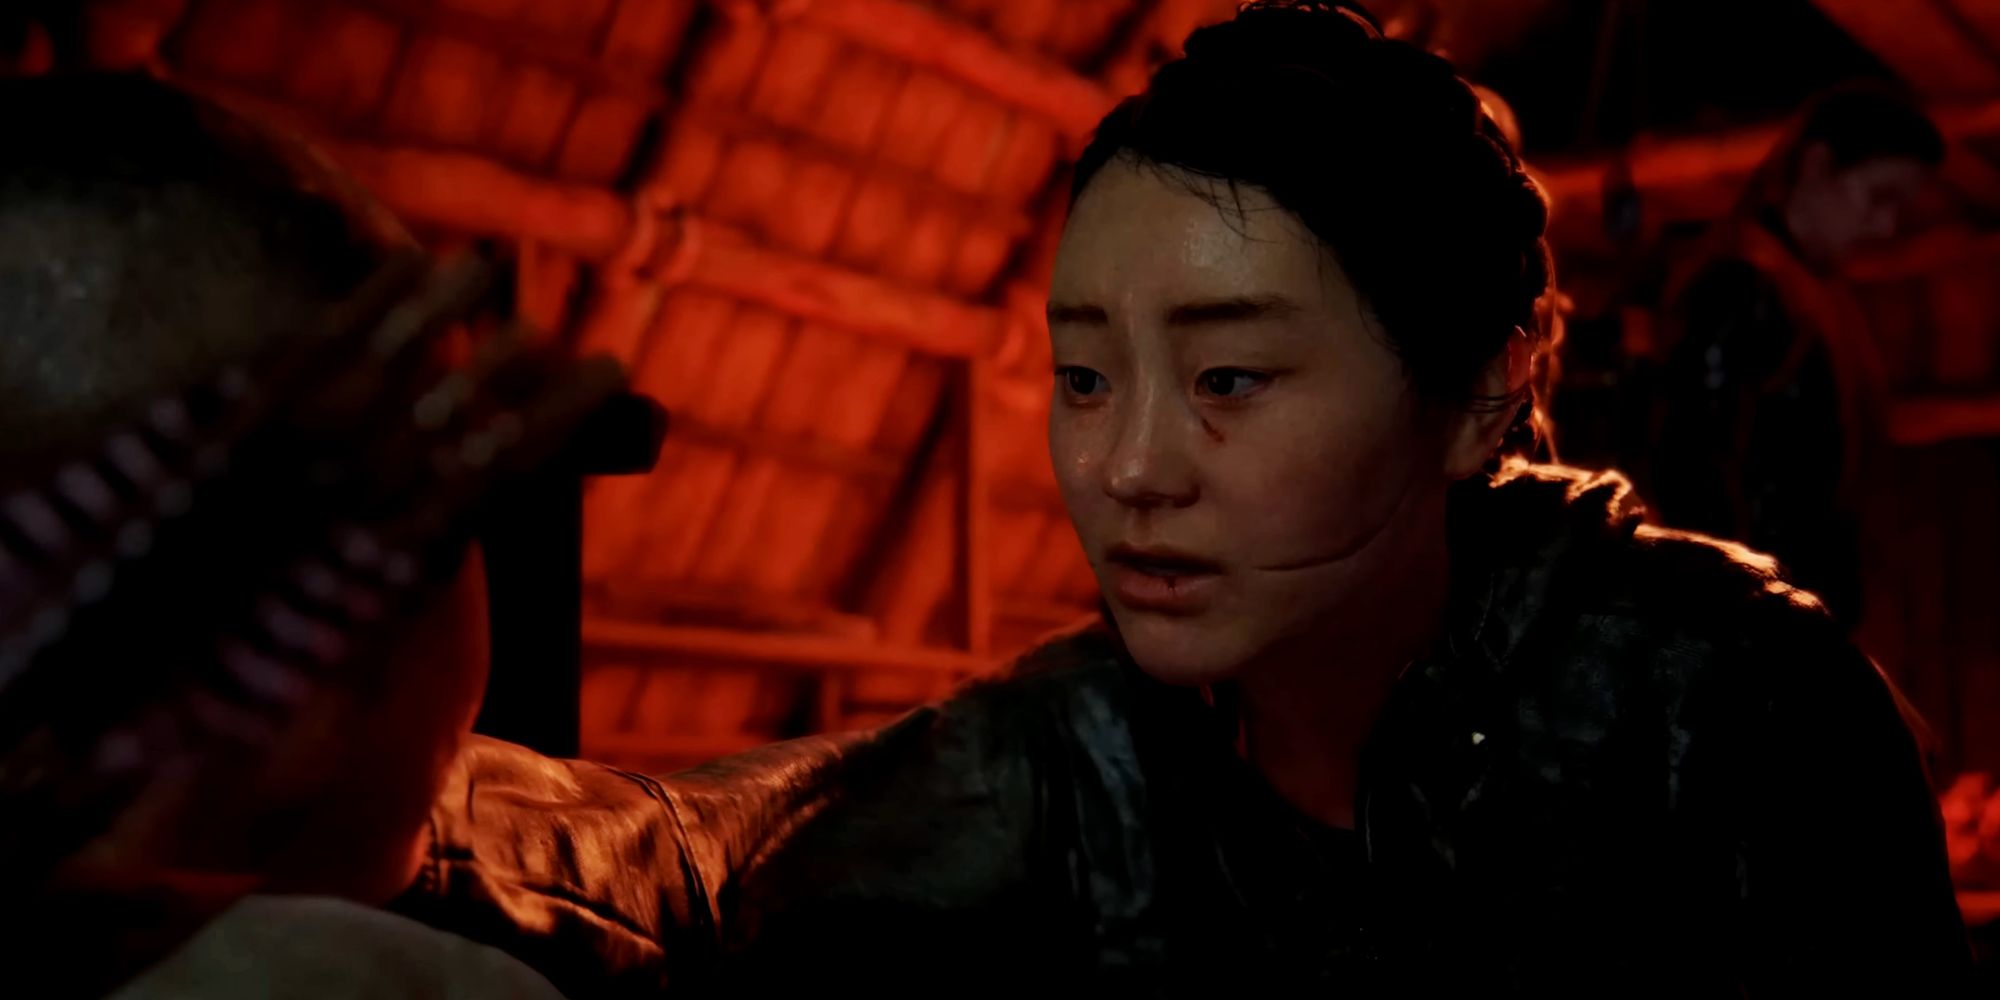 A woman with a deep scar across her cheek is kneeling and consoling a child on the edge of the frame. Another person is standing in the background out of focus in a wooden A-frame building filled with red light.